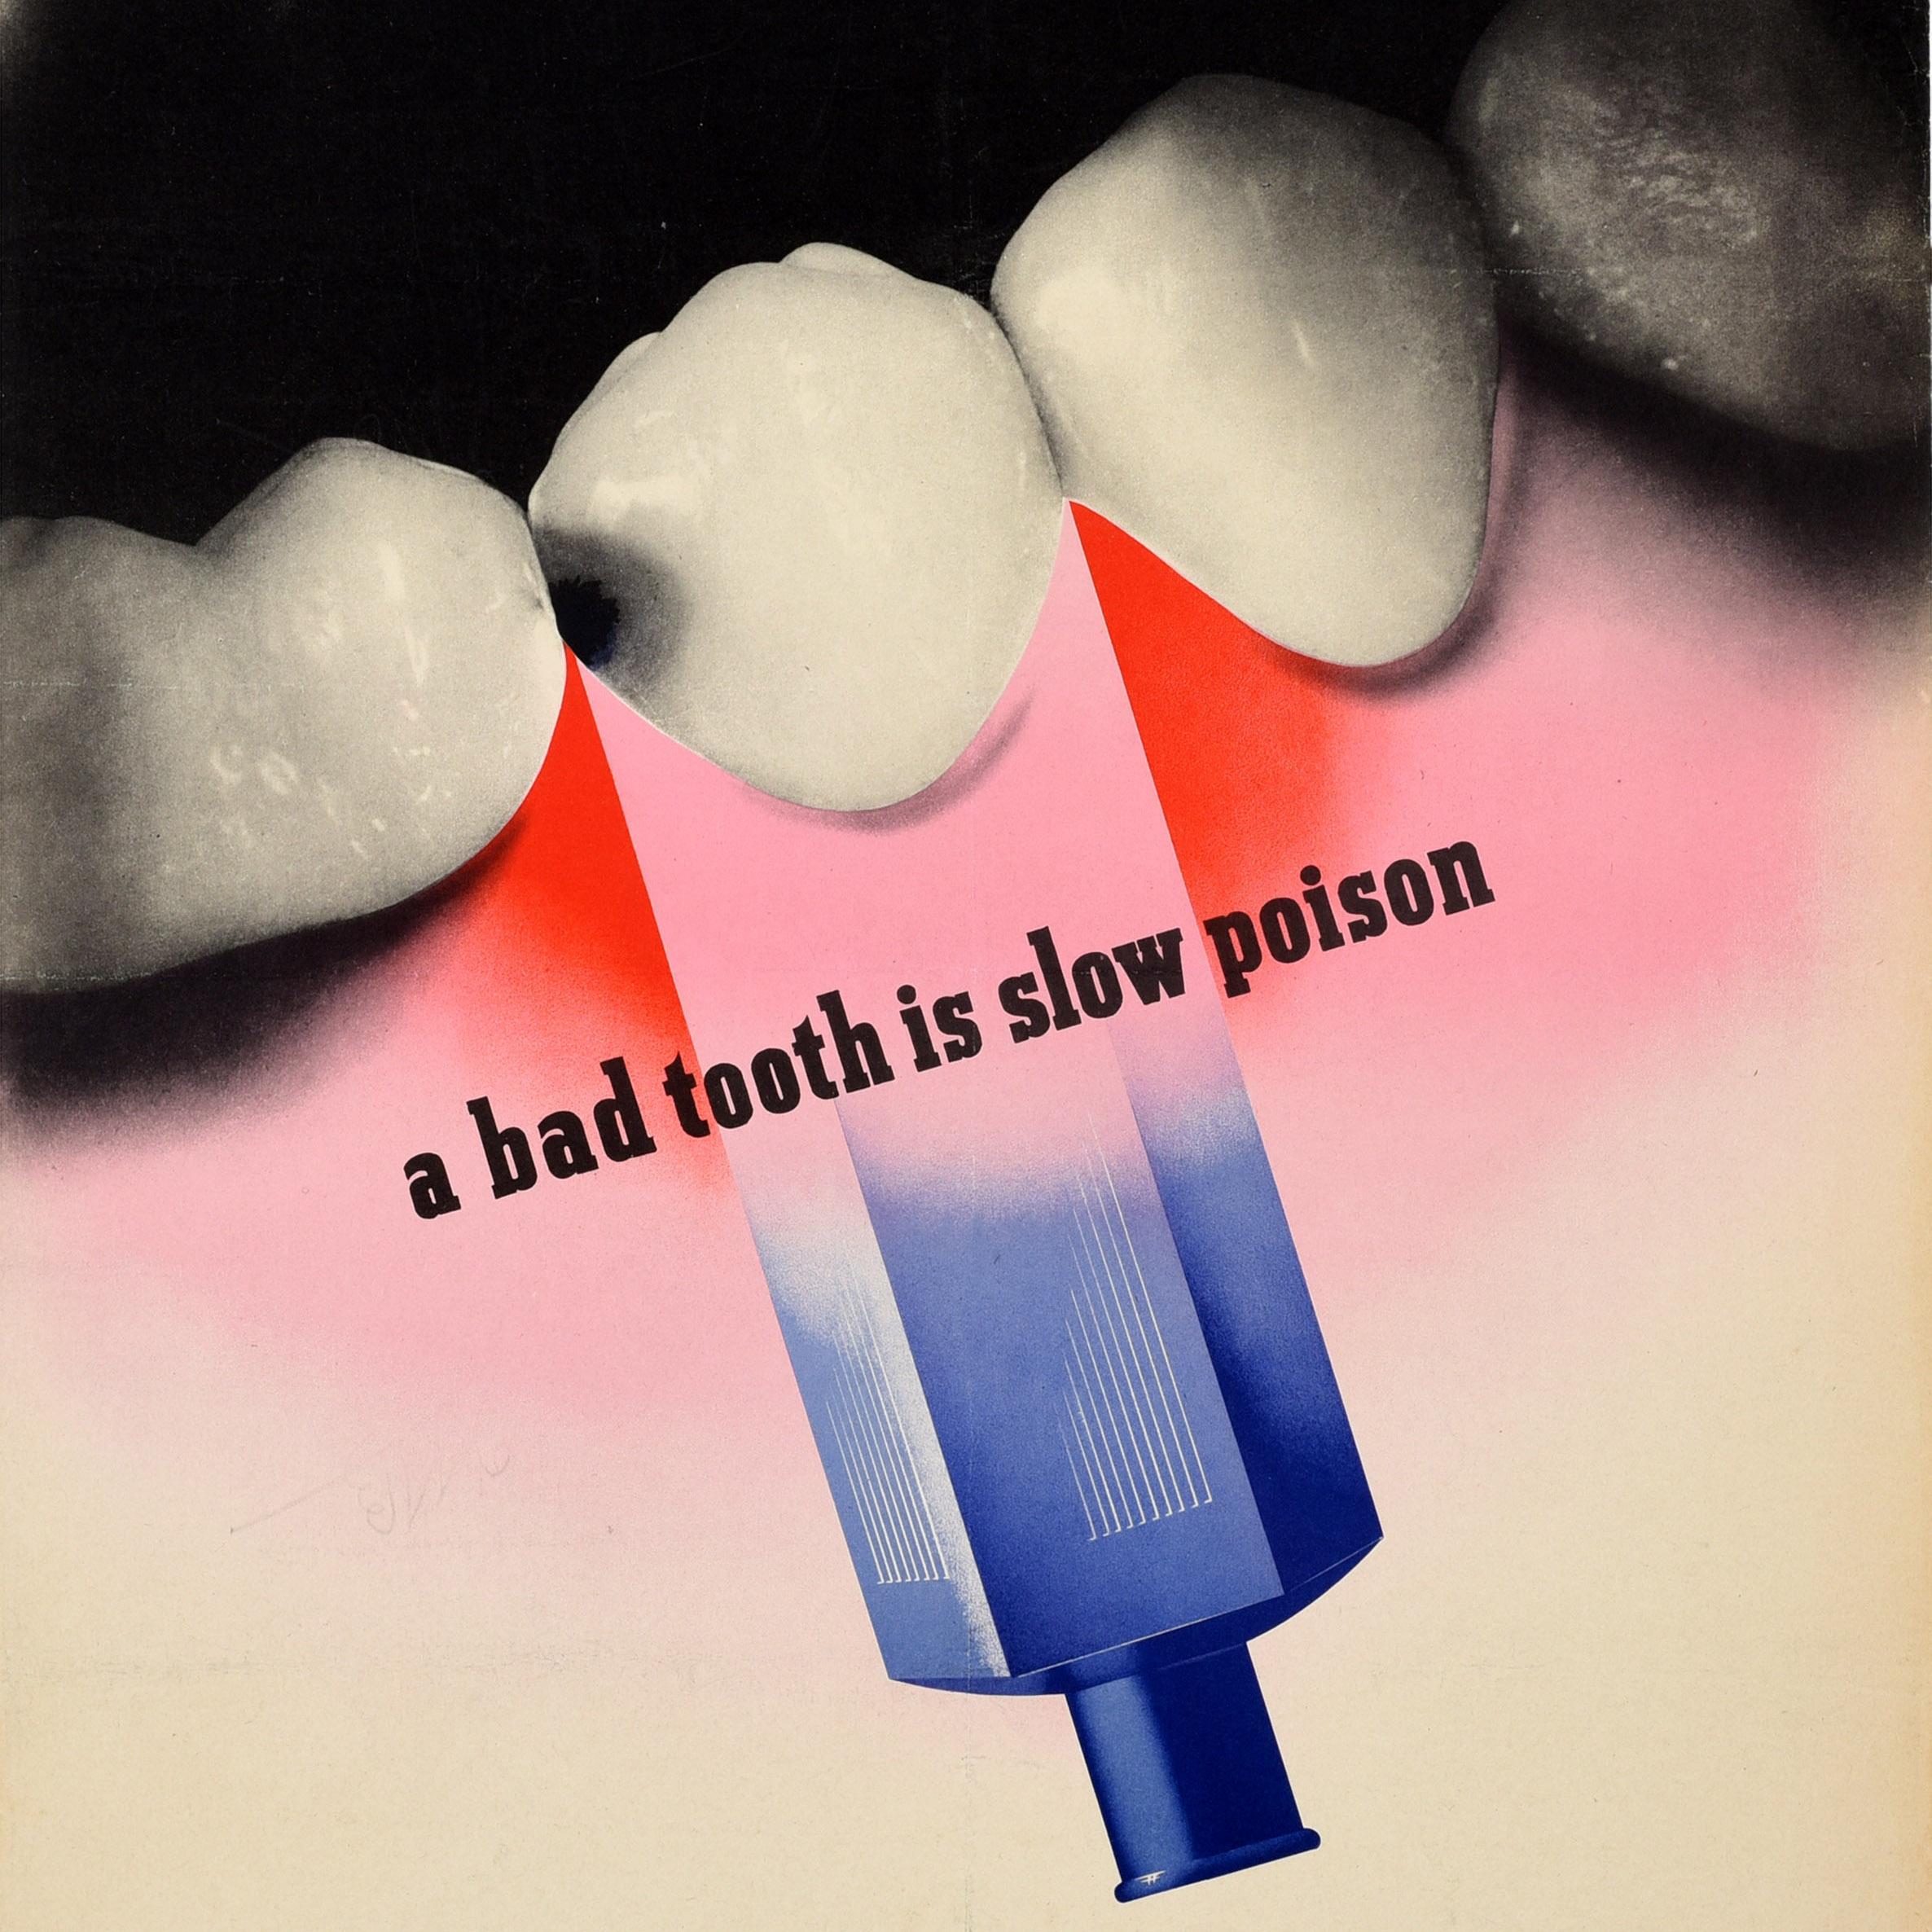 Original Vintage World War Two military health poster - A bad tooth is slow poison Visit your Dental Officer regularly - with a great design by the notable British graphic designer Abram Games (Abraham Gamse; 1914-1996) depicting a black and white